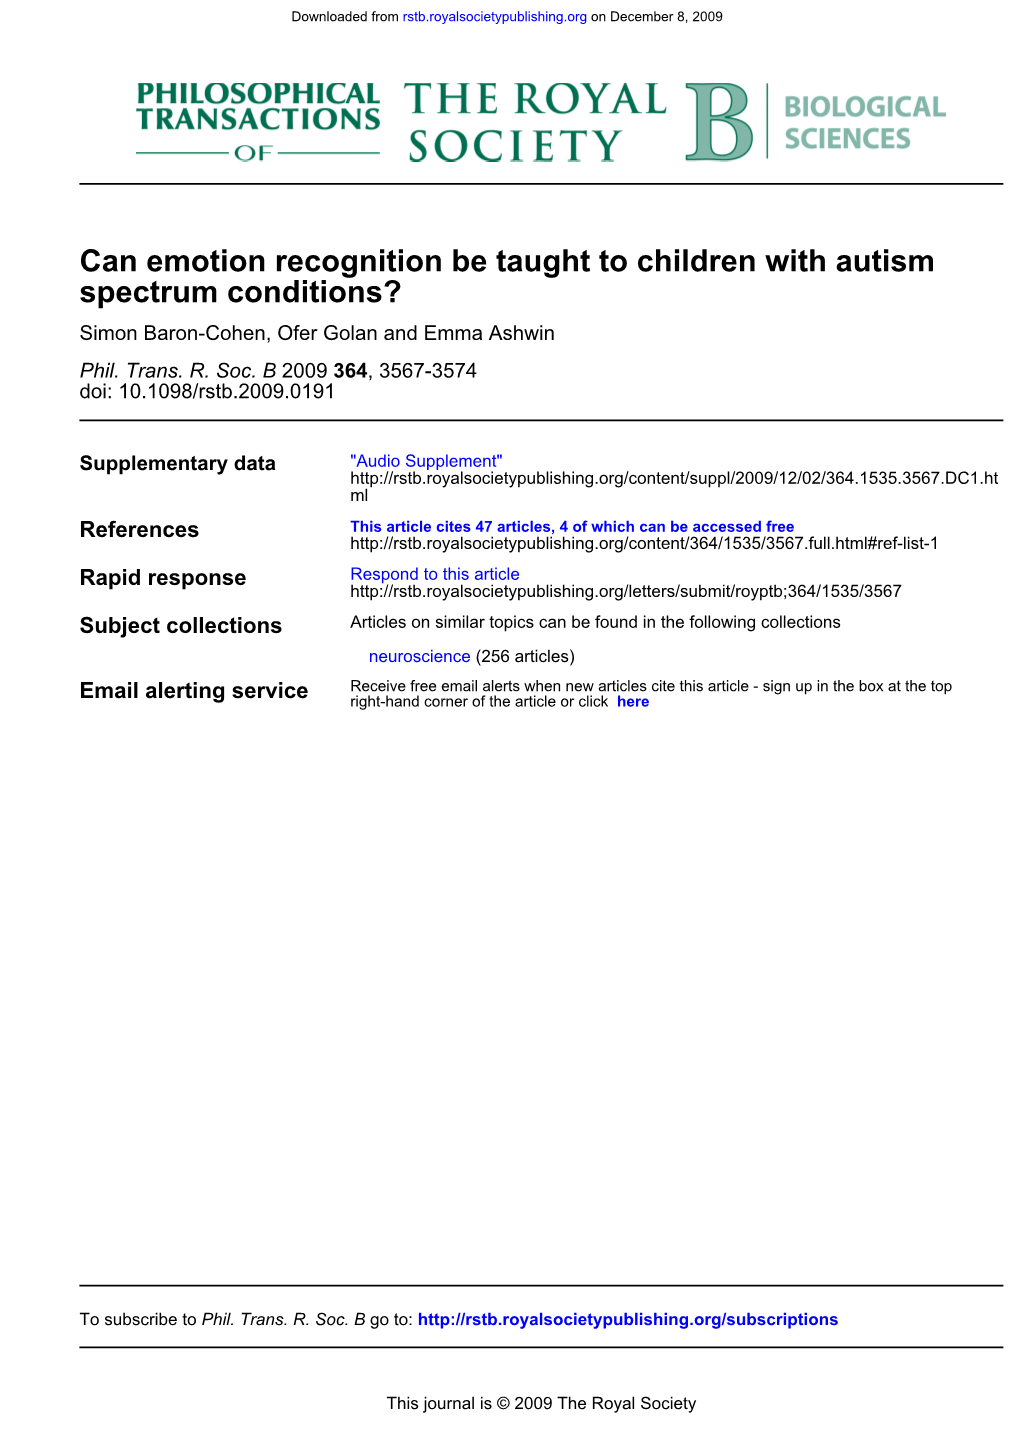 Can Emotion Recognition Be Taught to Children with Autism Spectrum Conditions?